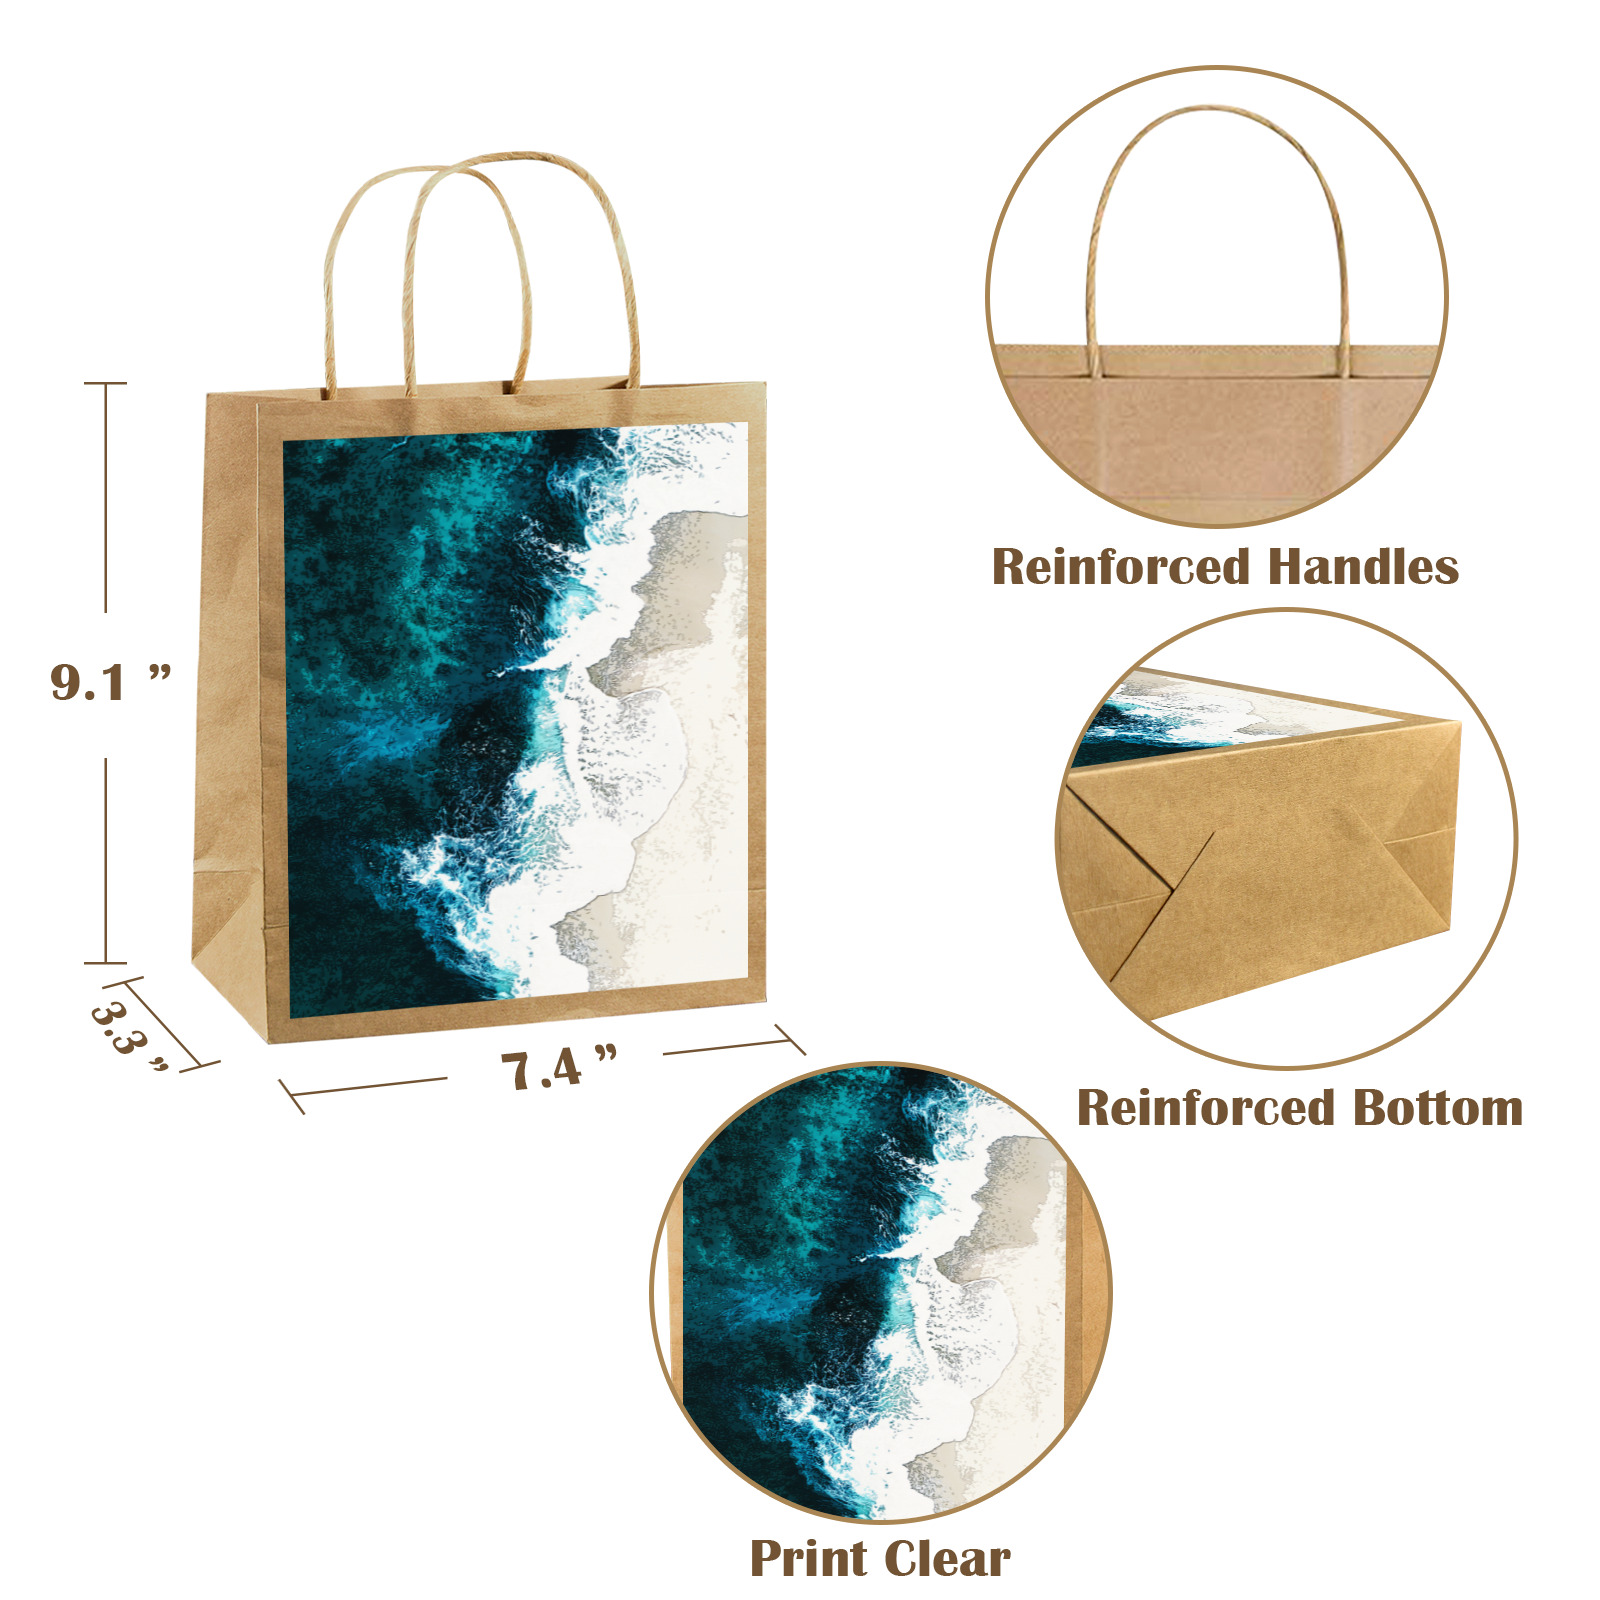 Ocean And Beach Kraft Paper Shopping Bag (One-Sided Printing)